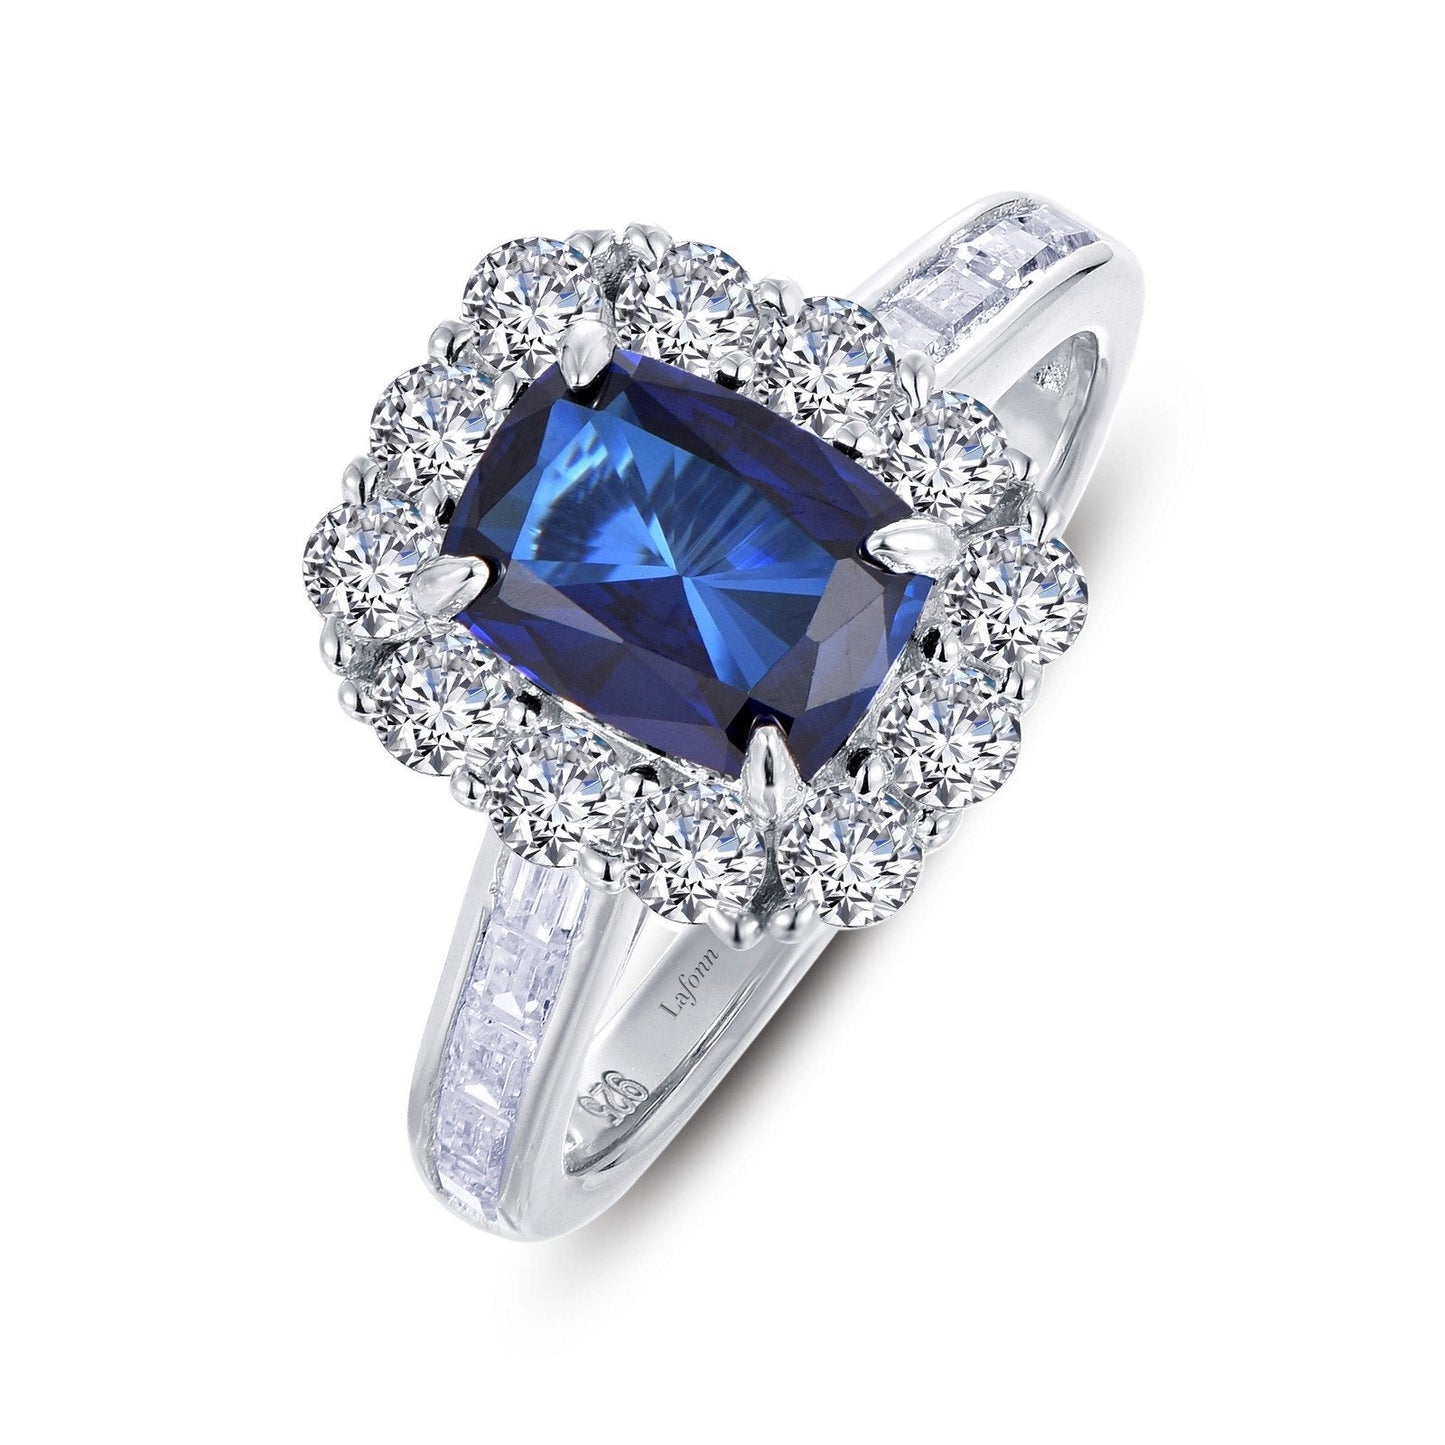 Load image into Gallery viewer, Lafonn Cushion-Cut Halo Engagement Ring Sapphire RINGS Size 7 Platinum 4.06 CTS Approx.10.8(W)
